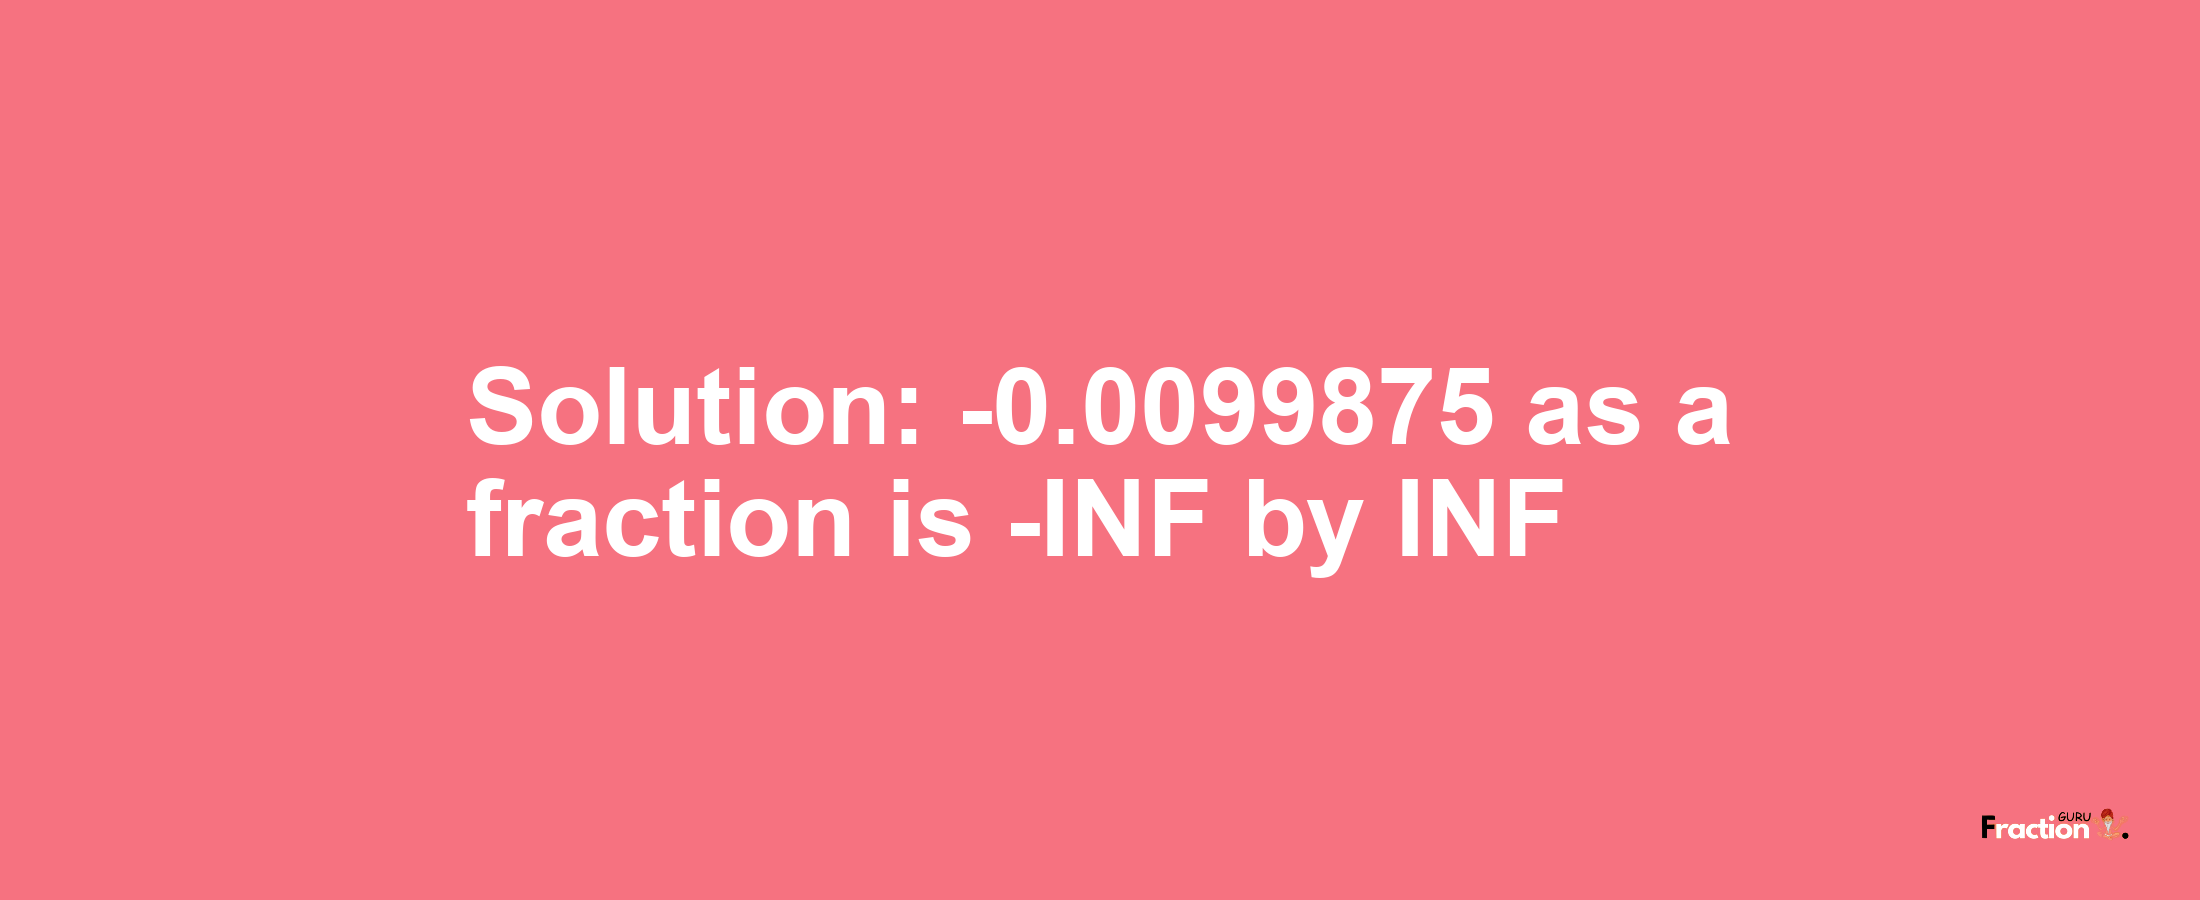 Solution:-0.0099875 as a fraction is -INF/INF